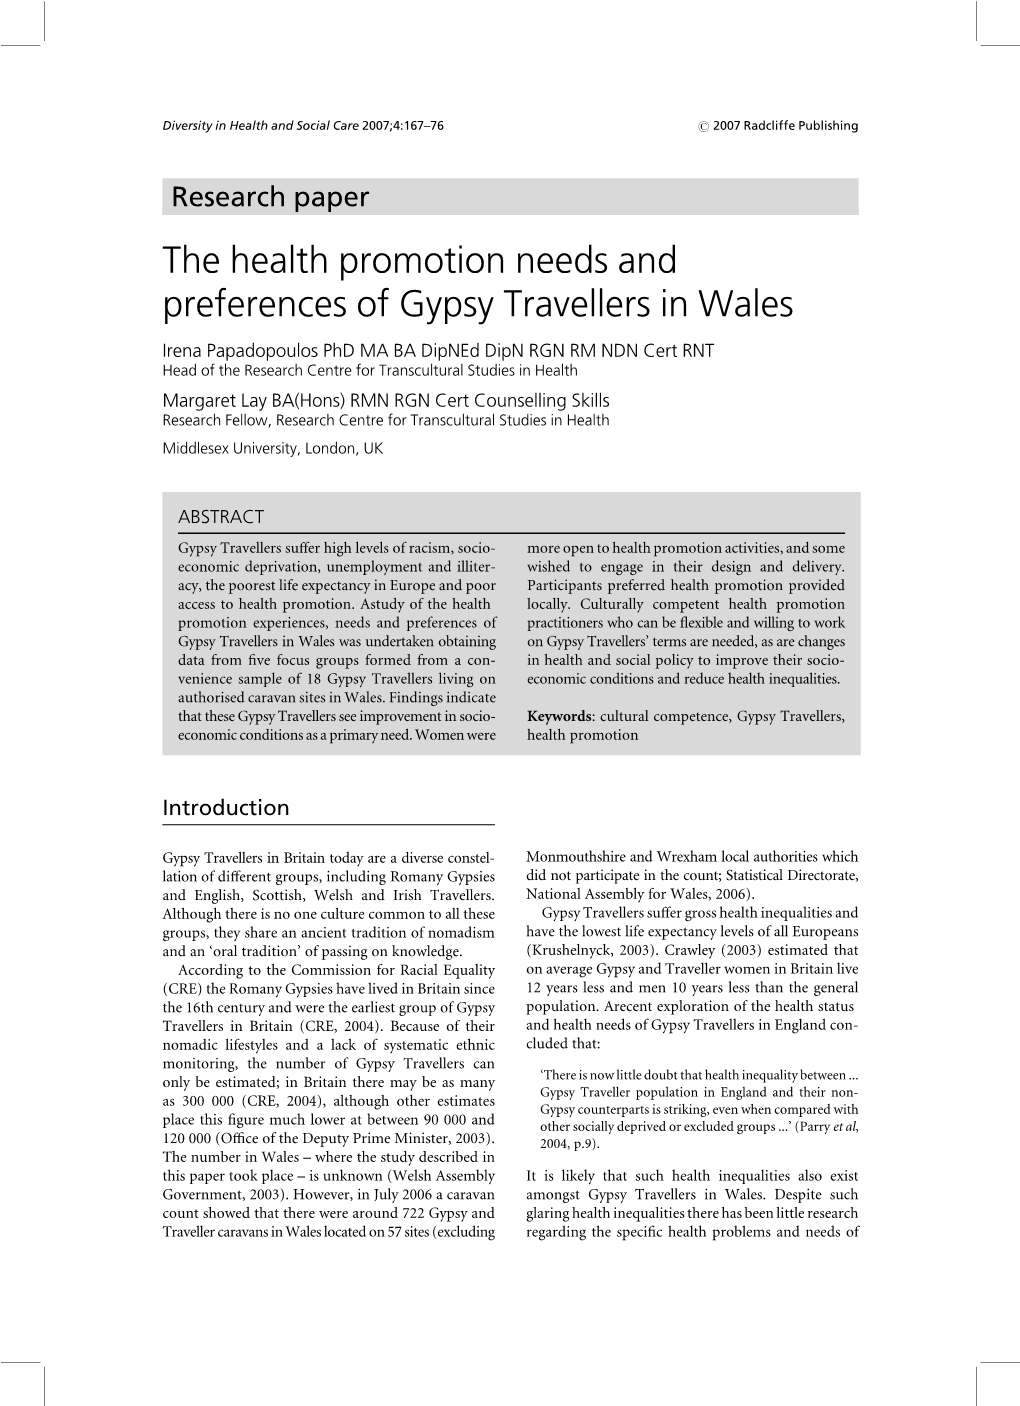 The Health Promotion Needs and Preferences of Gypsy Travellers In